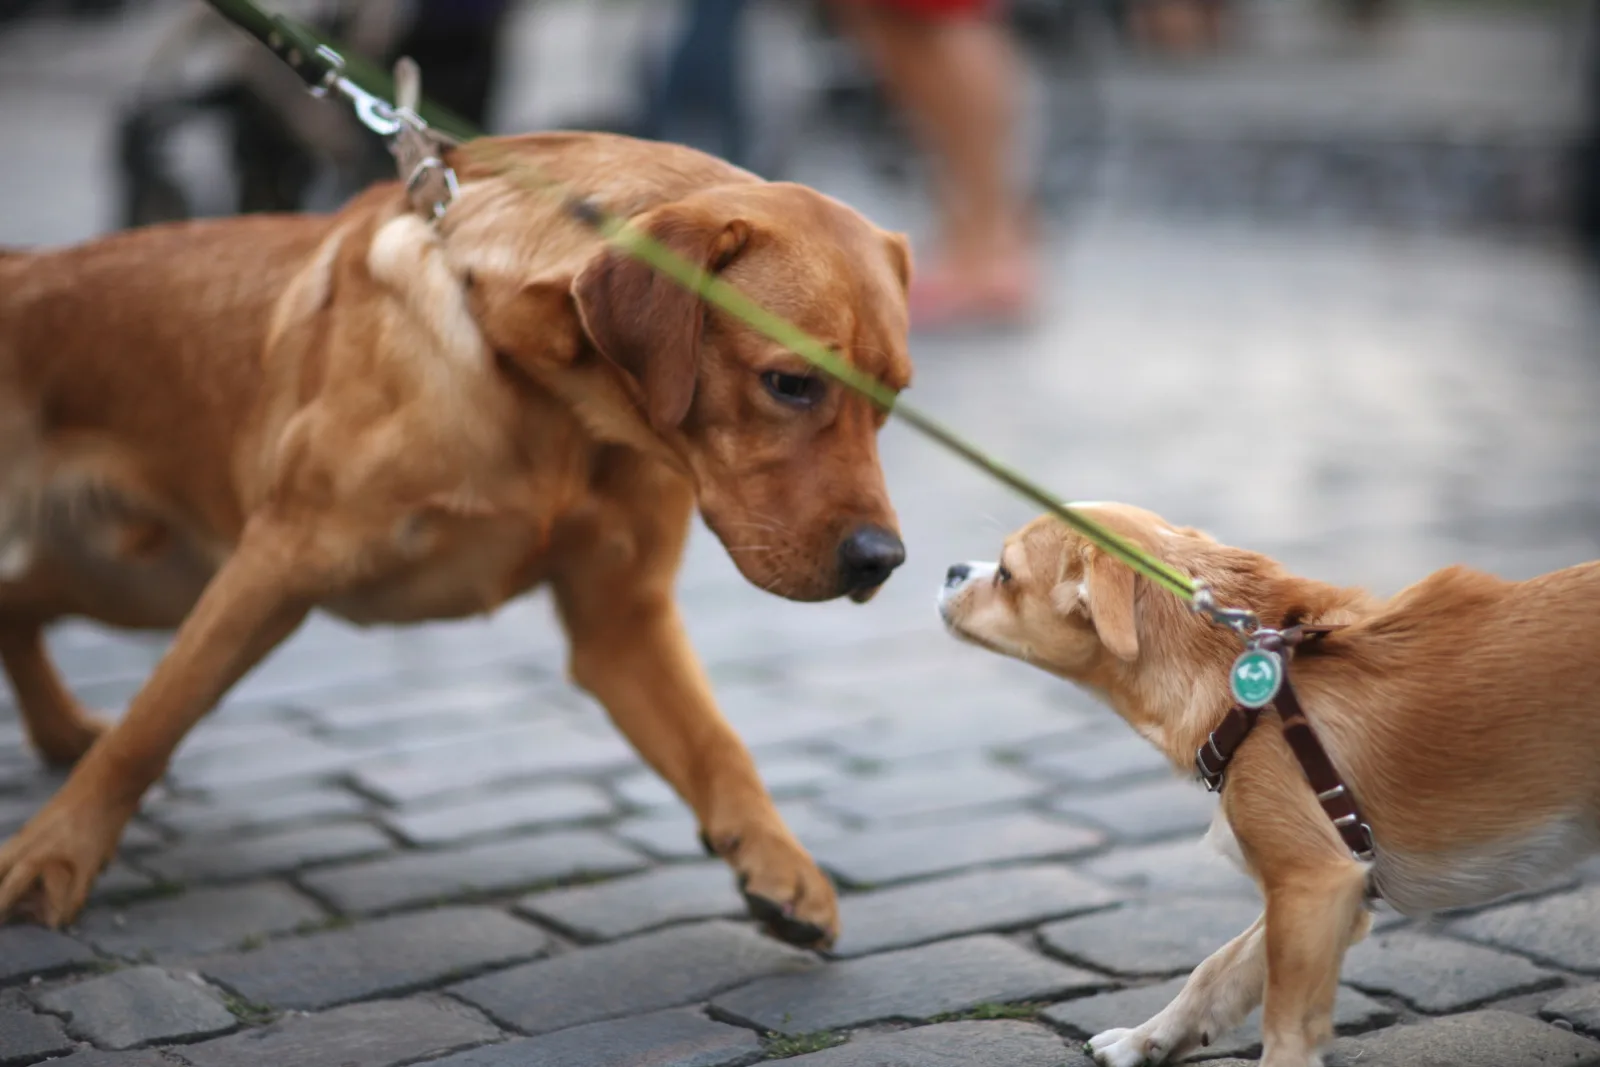 The meeting of two dogs with the leash on the street